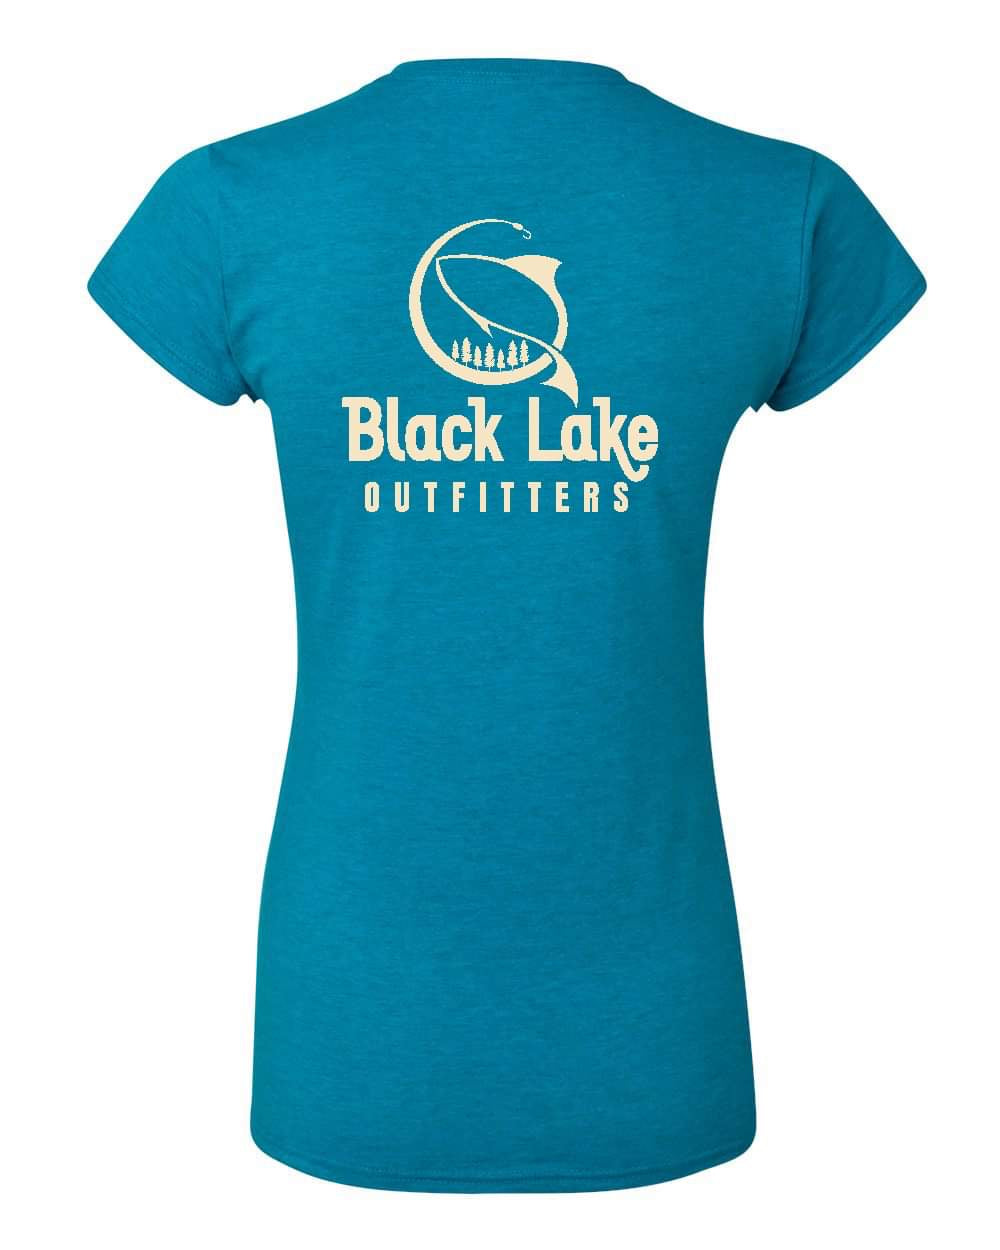 WOMENS FITTED SOFT STYLE TEE IN SAPHIRE BLUE WITH CREAM INK